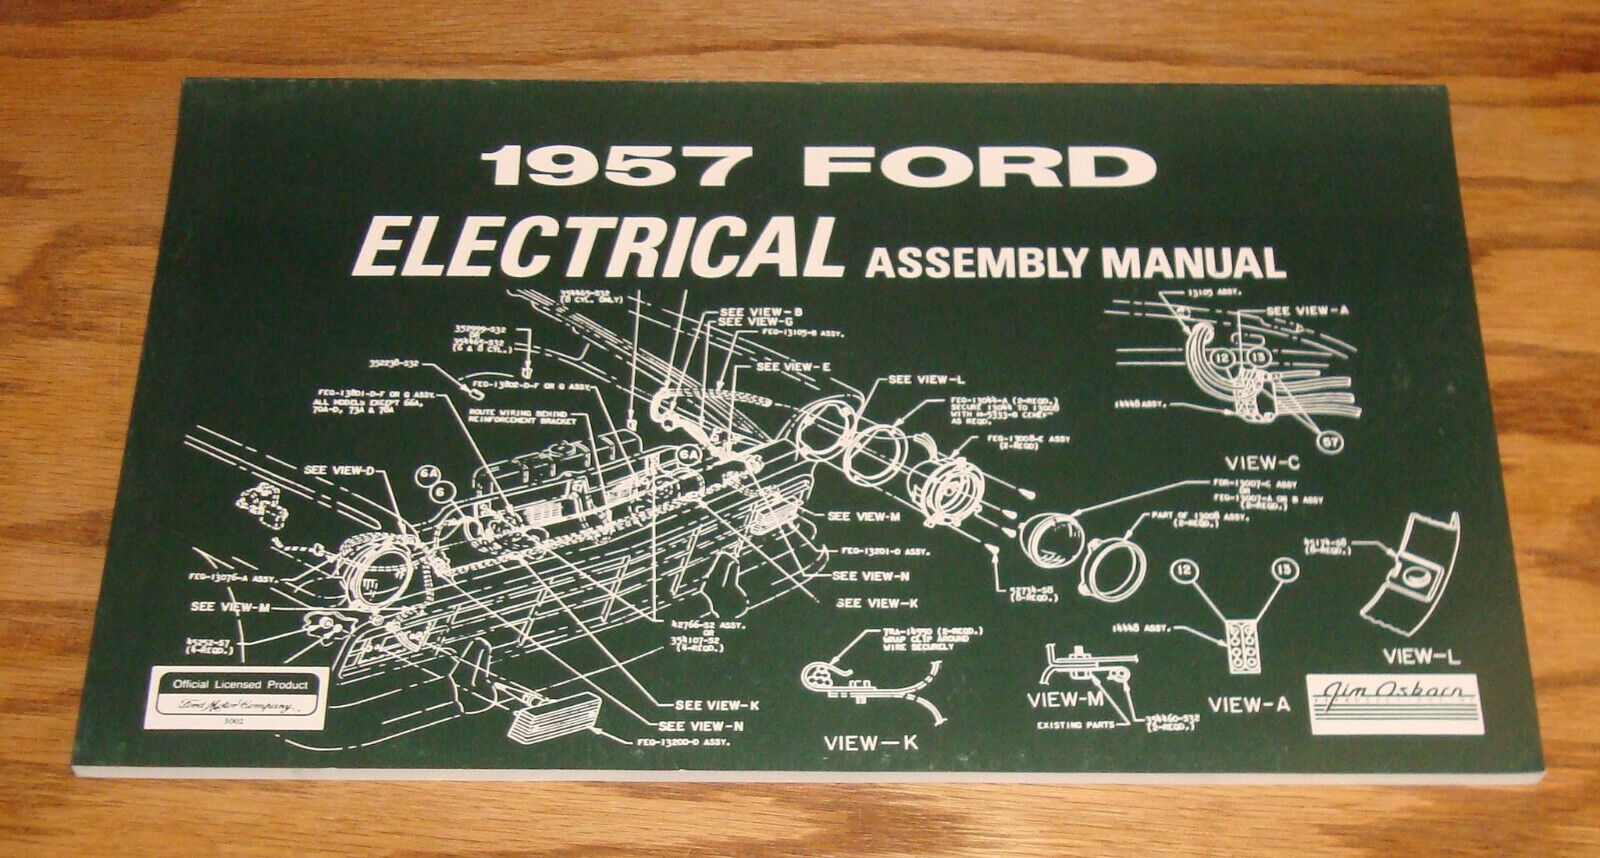 1957 Ford Full Size Car Electrical Assembly Manual 57 Galaxie